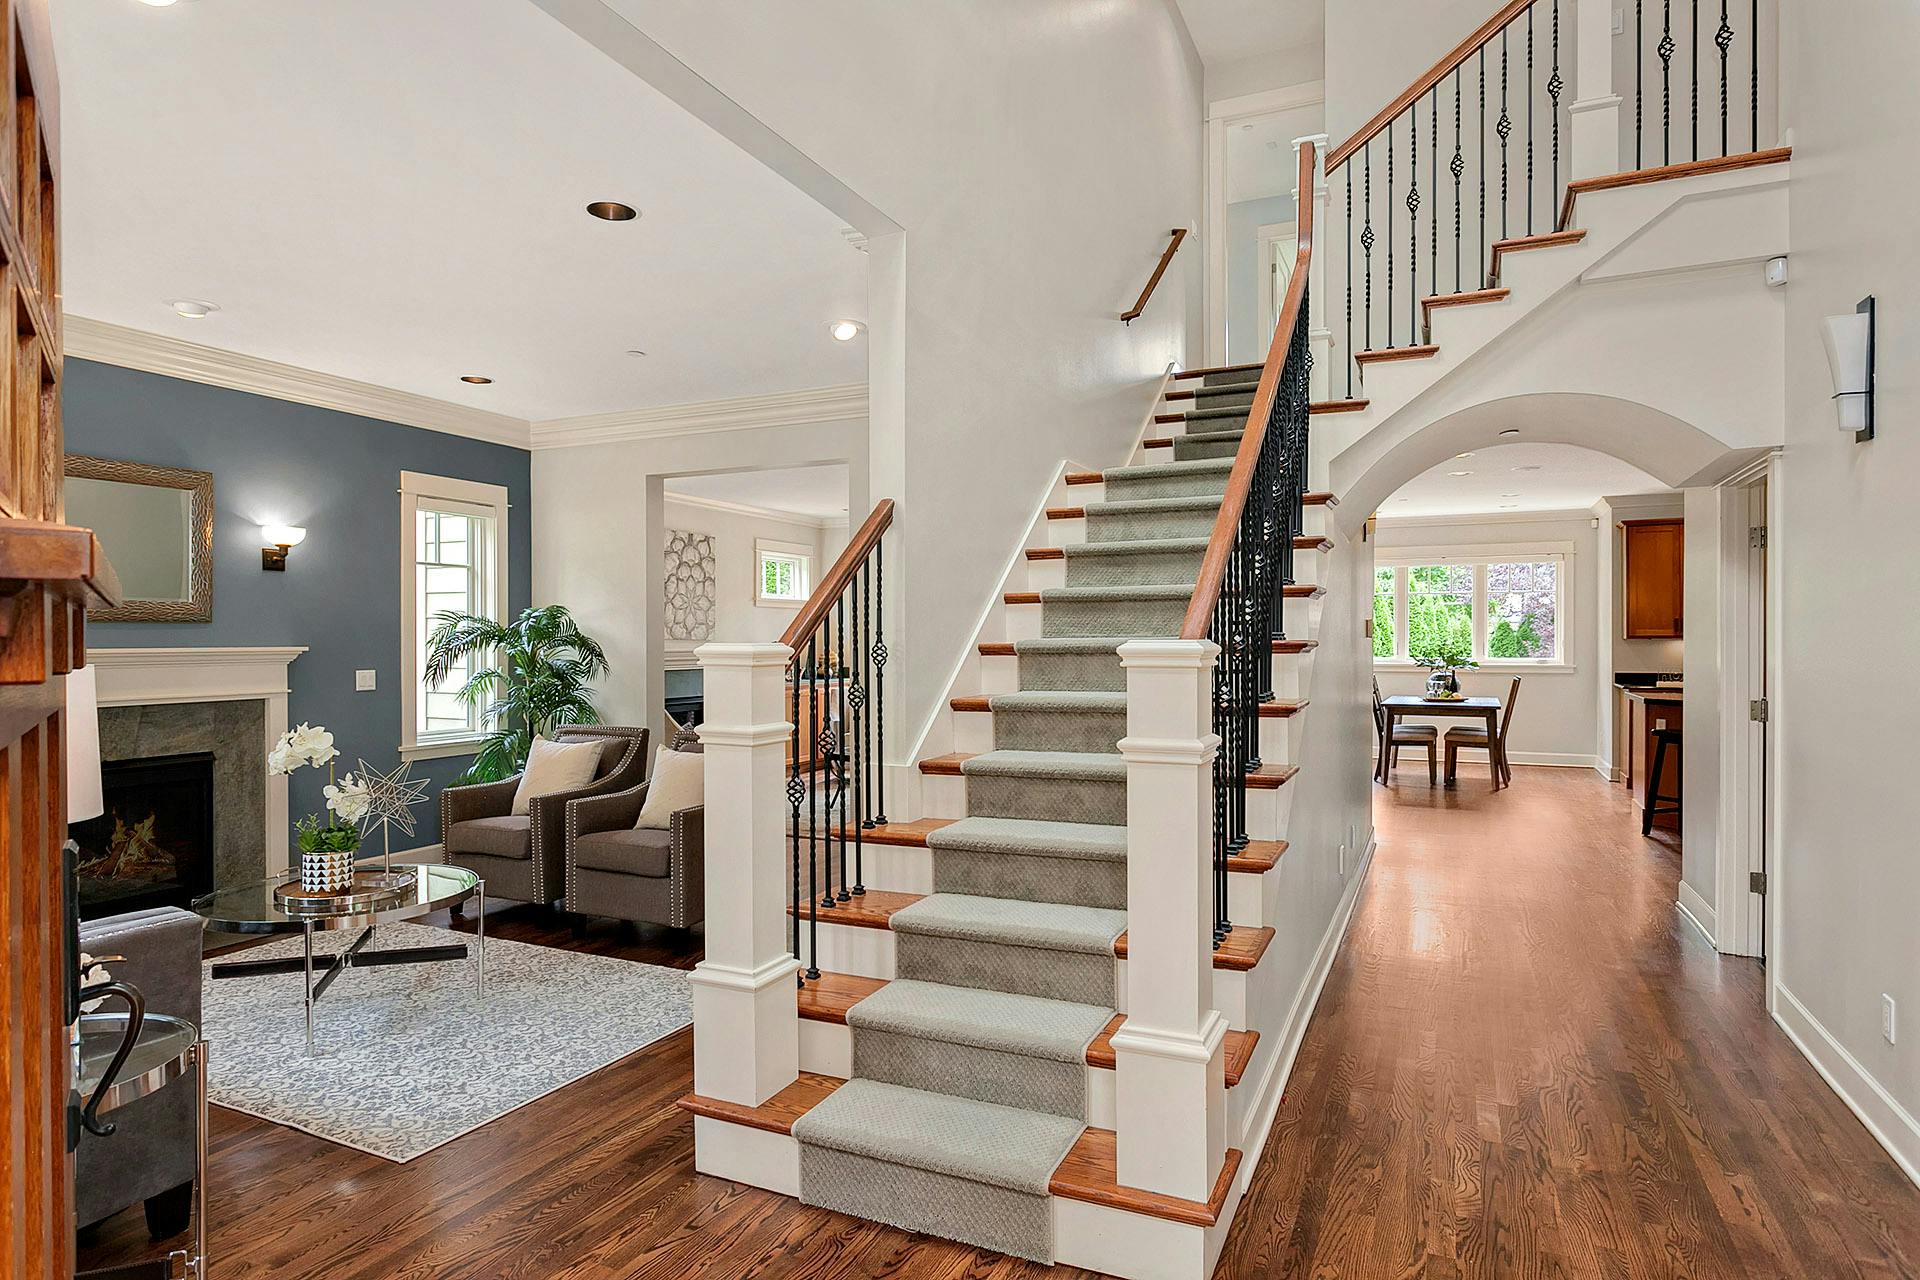 How to Photograph Entrances and Staircases for Real Estate